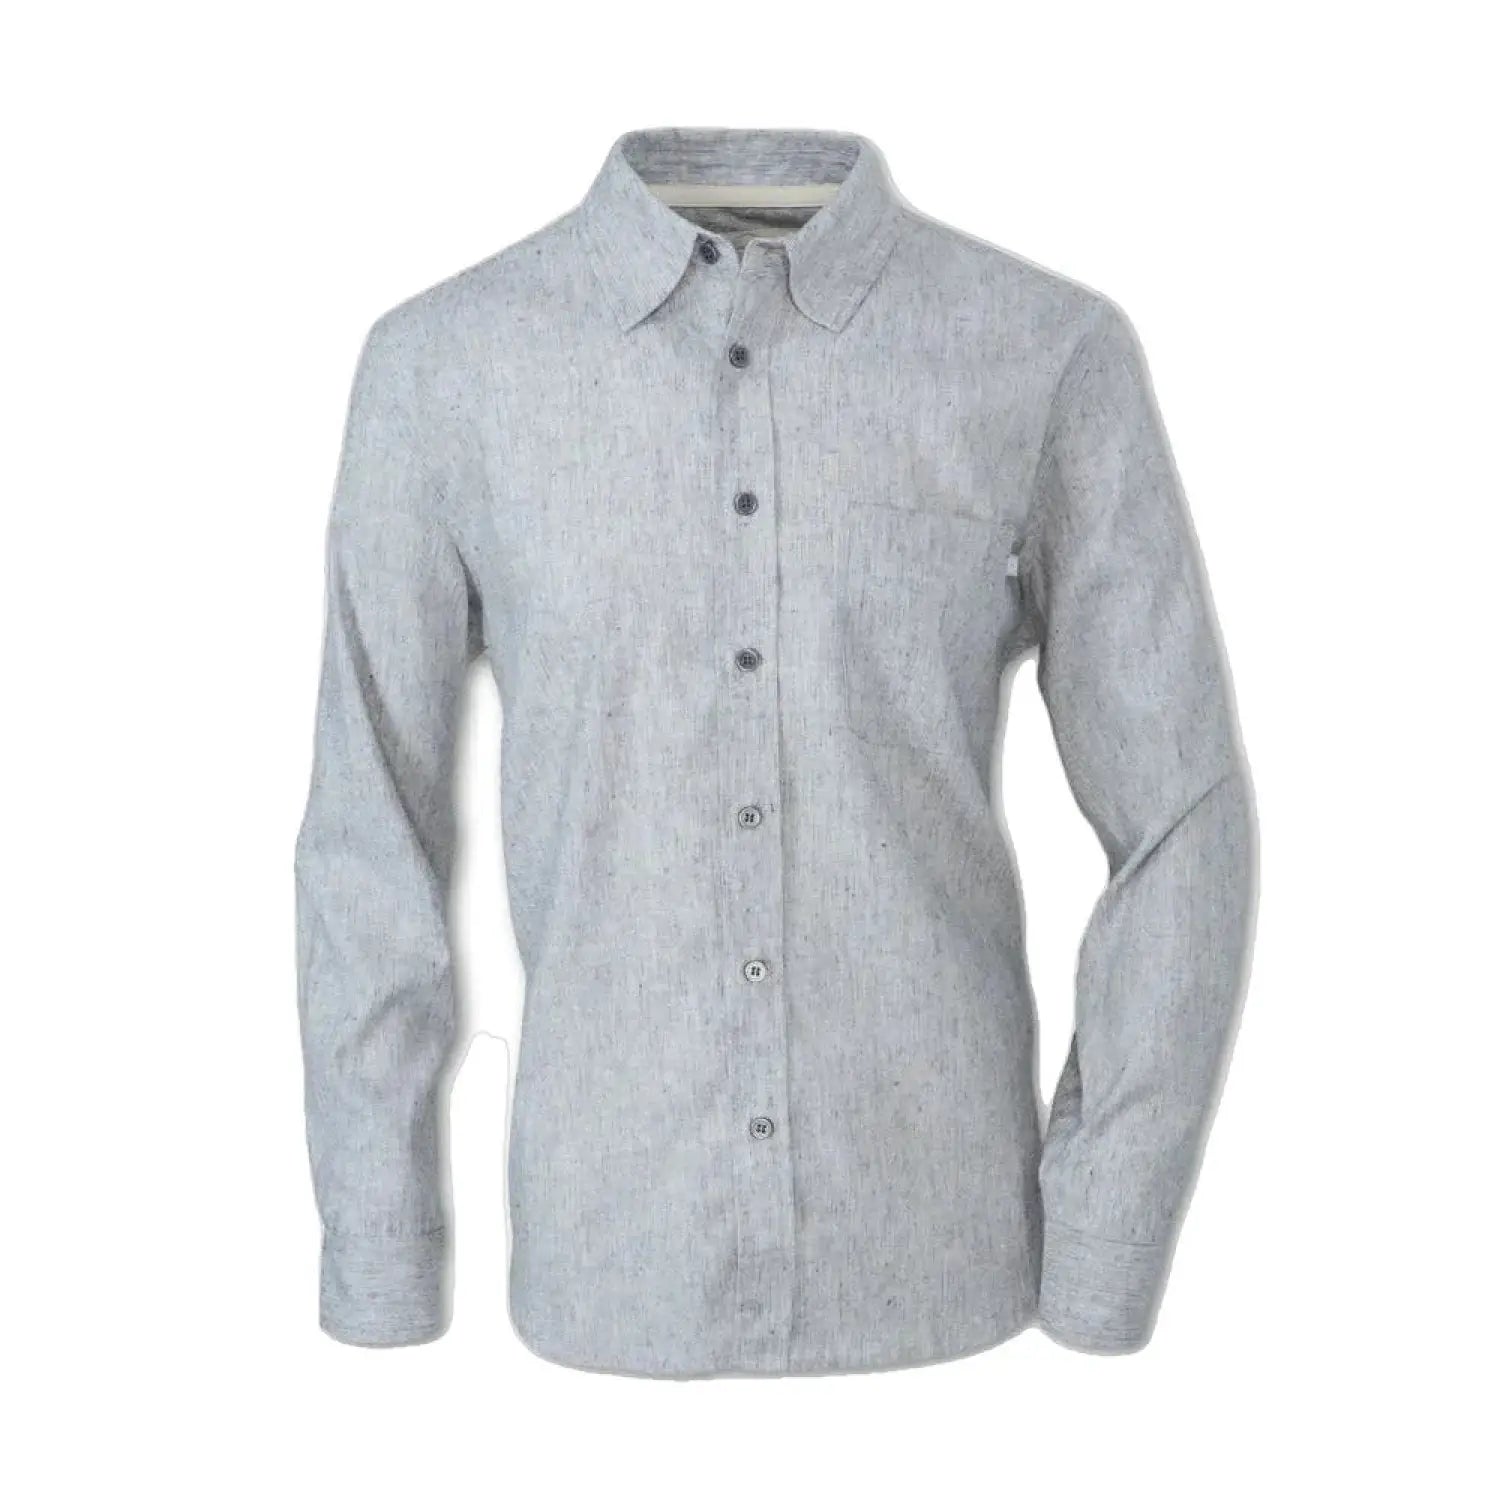 Purnell Men's Pinstripe Hemp Blend Shirt shown in Black and White color option. Front view. 